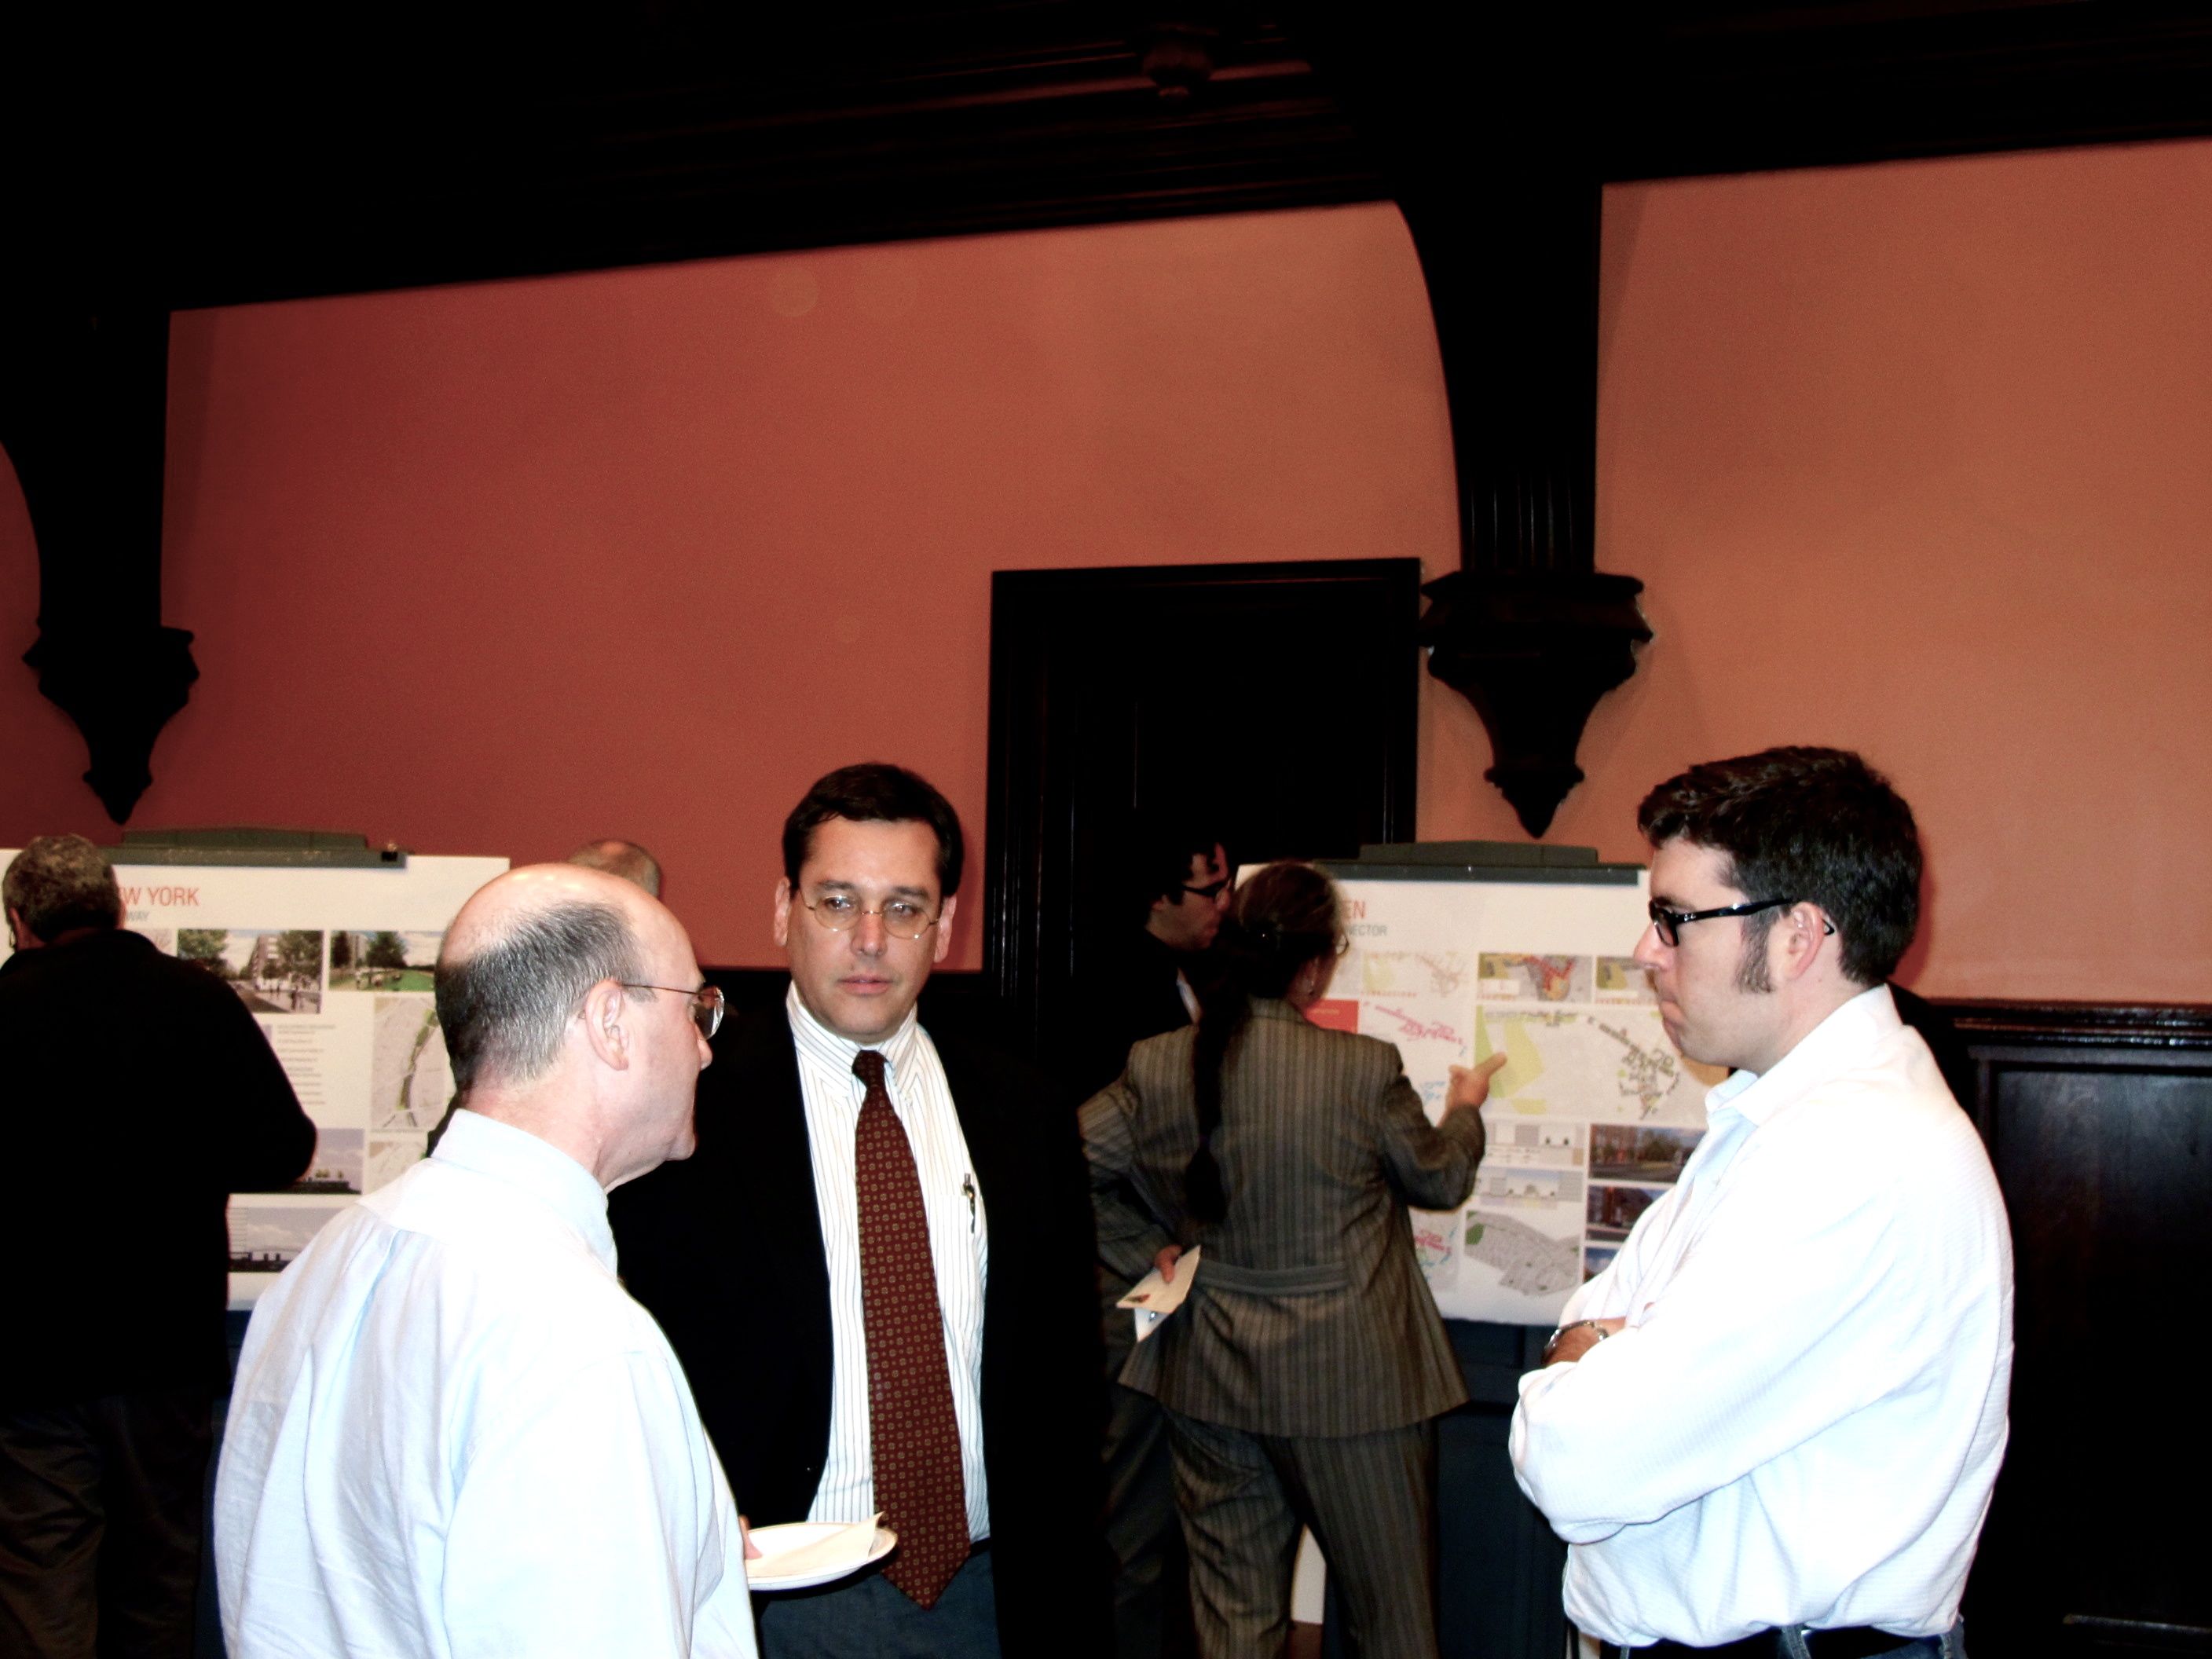 From left: PennDOT's Chuck Davies, Harris Steinberg of PennPraxis and URS planner Doug Robbins discuss presentations